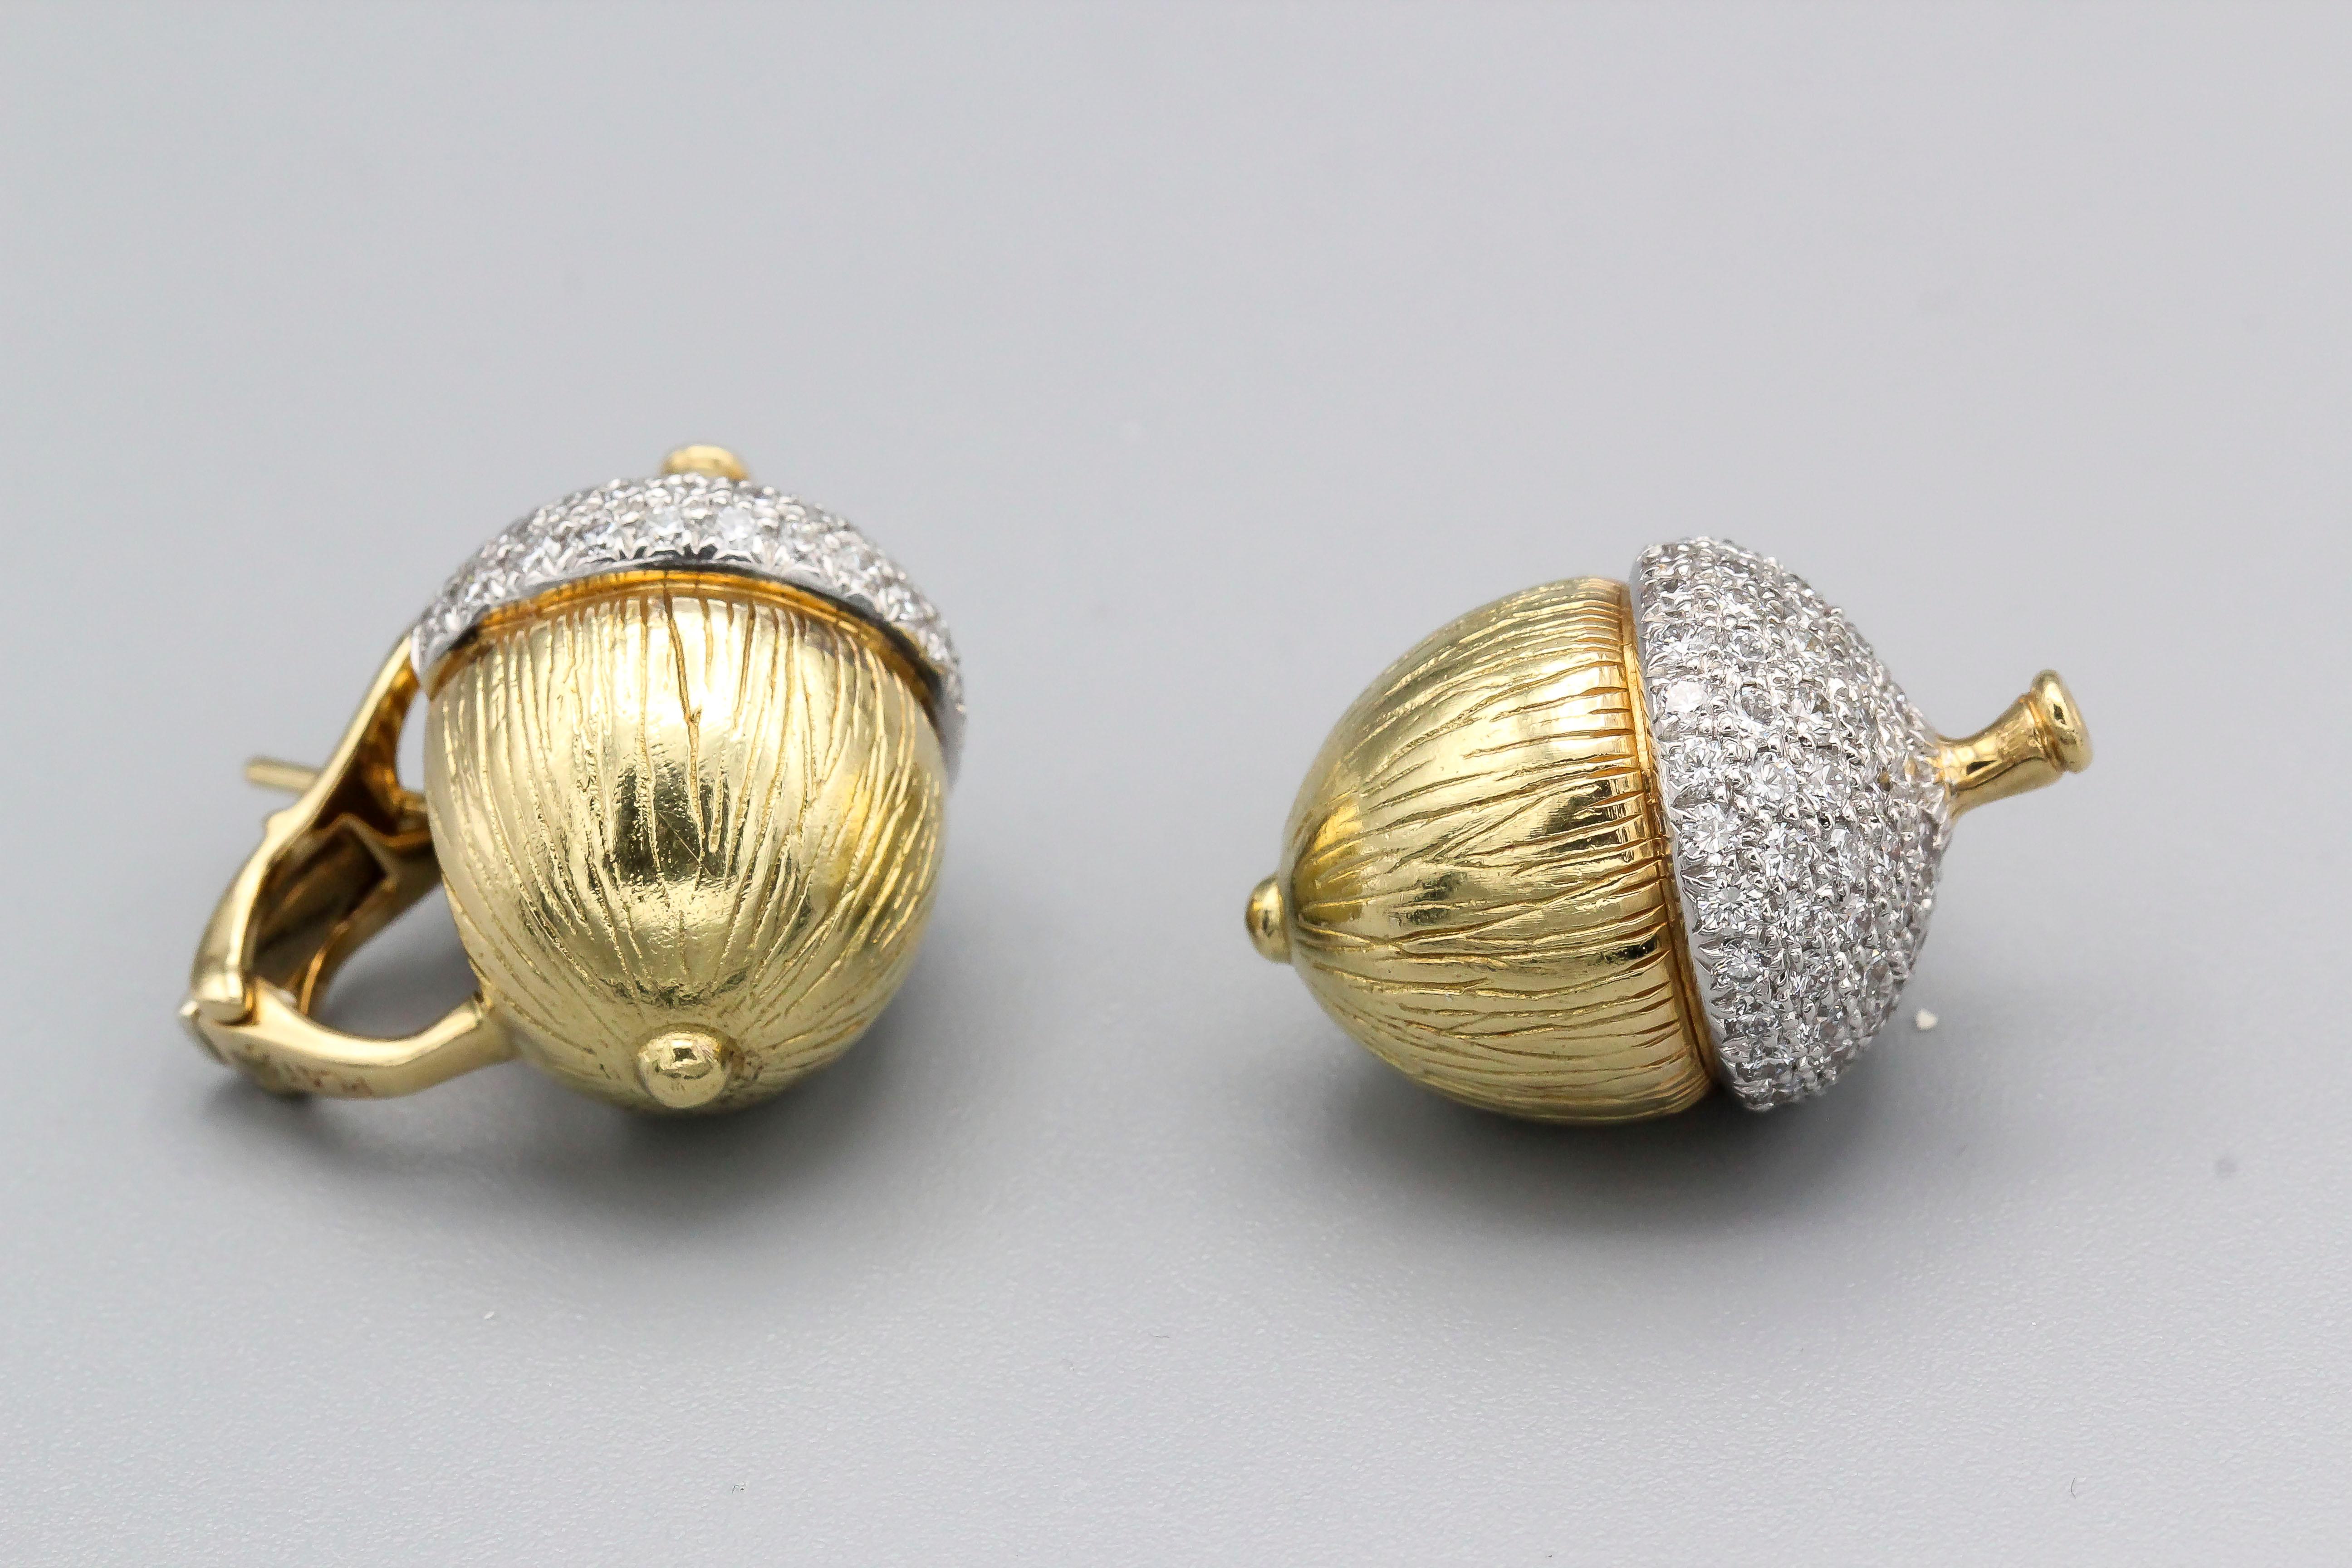 Fine pair of diamond, platinum and 18K yellow gold earrings by Verdura. Resembling acorns, they are adorned with high grade round brilliant cut diamonds over a very detailed gold and platinum setting. Current retail price $23500.

Hallmarks: